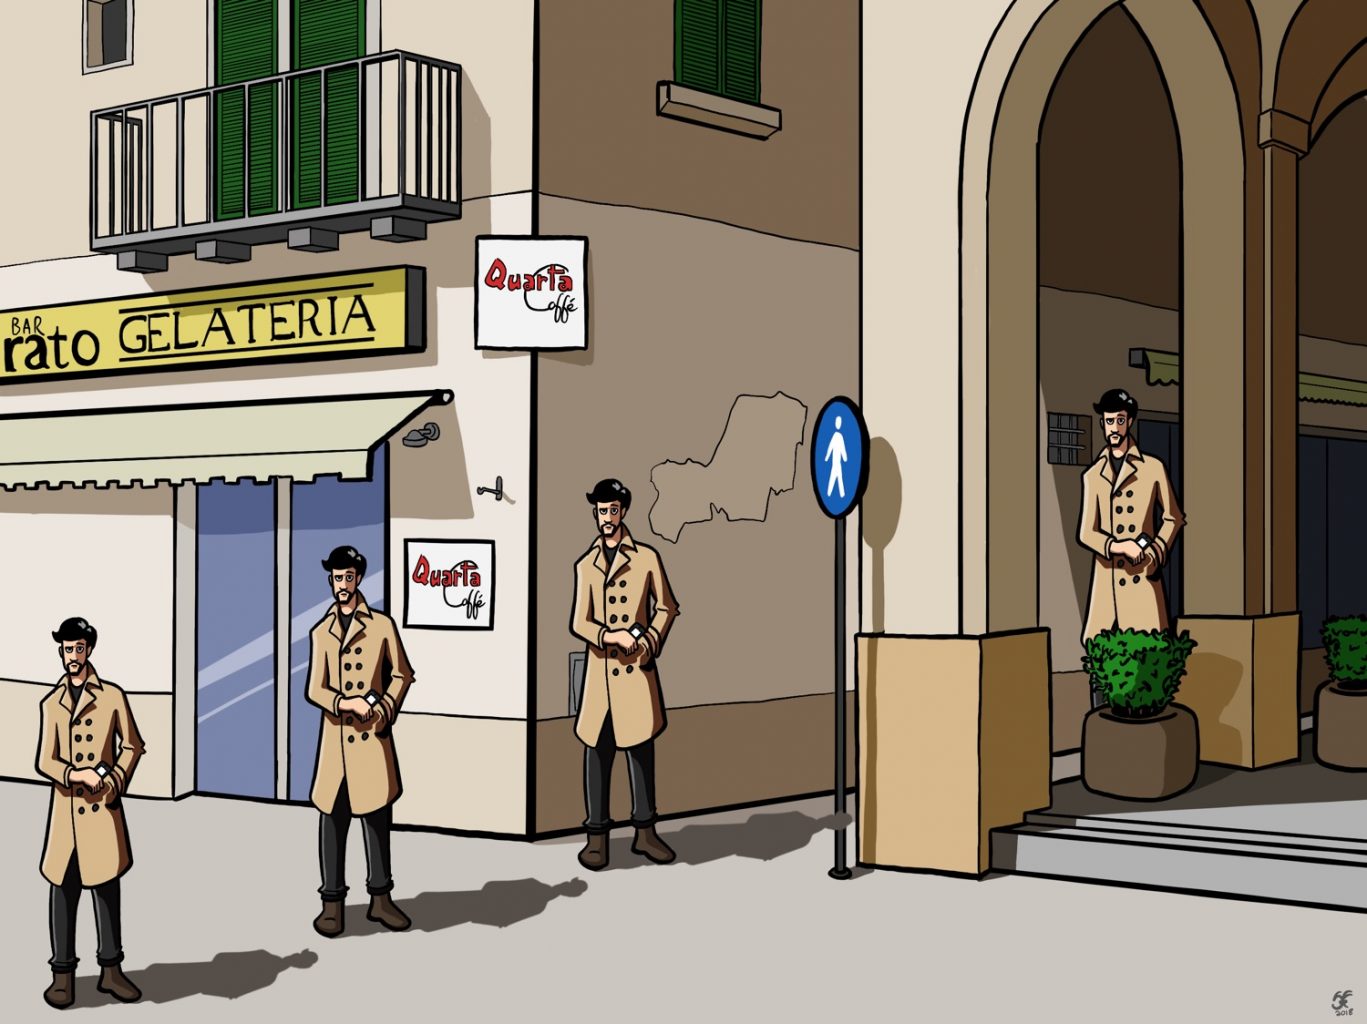 An illustration of a piazza in Lecce, Italy. There are four men with trench coats but their perspective is all wrong so it looks like they go from tiny to gigantic.